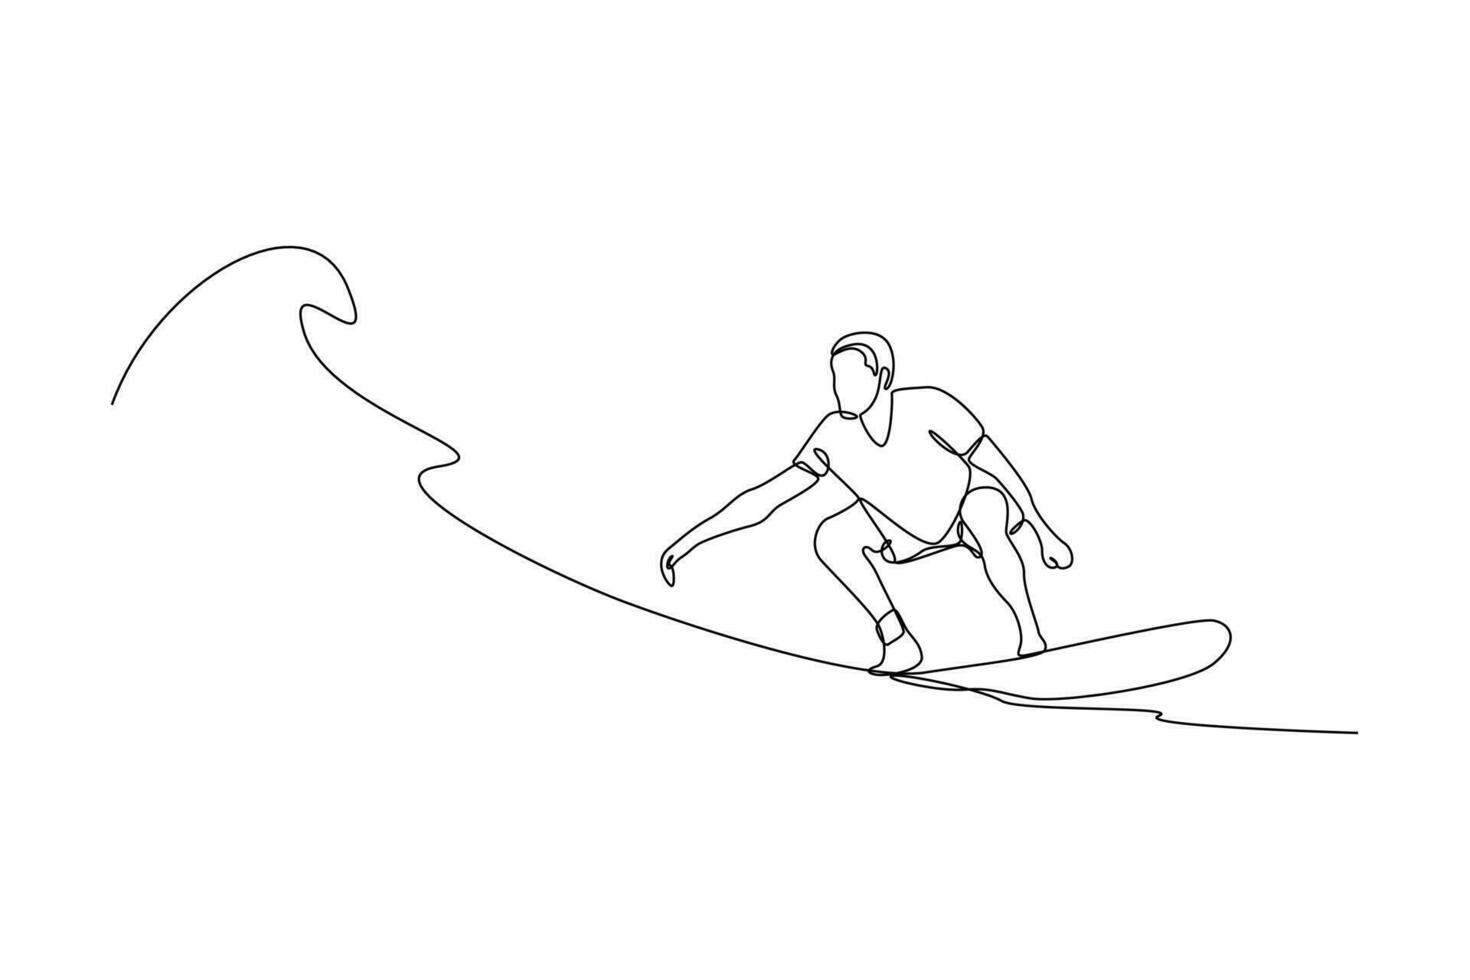 Continuous one-line drawing man learning to surf on the beach. Class it up concept. Single line drawing design graphic vector illustration